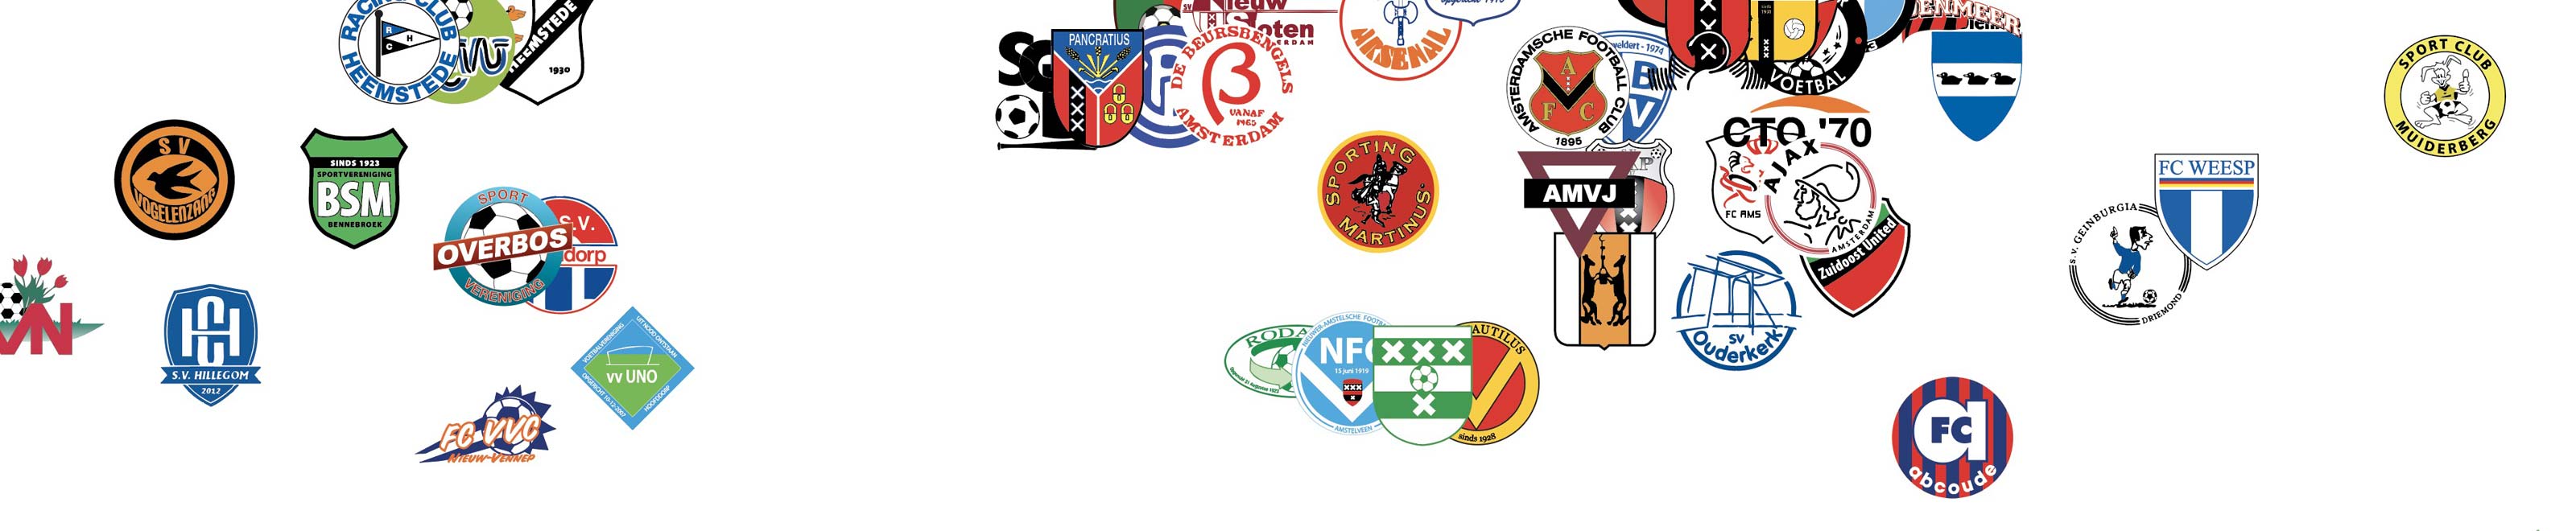 cropped poster Dutch football clubs with Amsterdam teams like Ajax